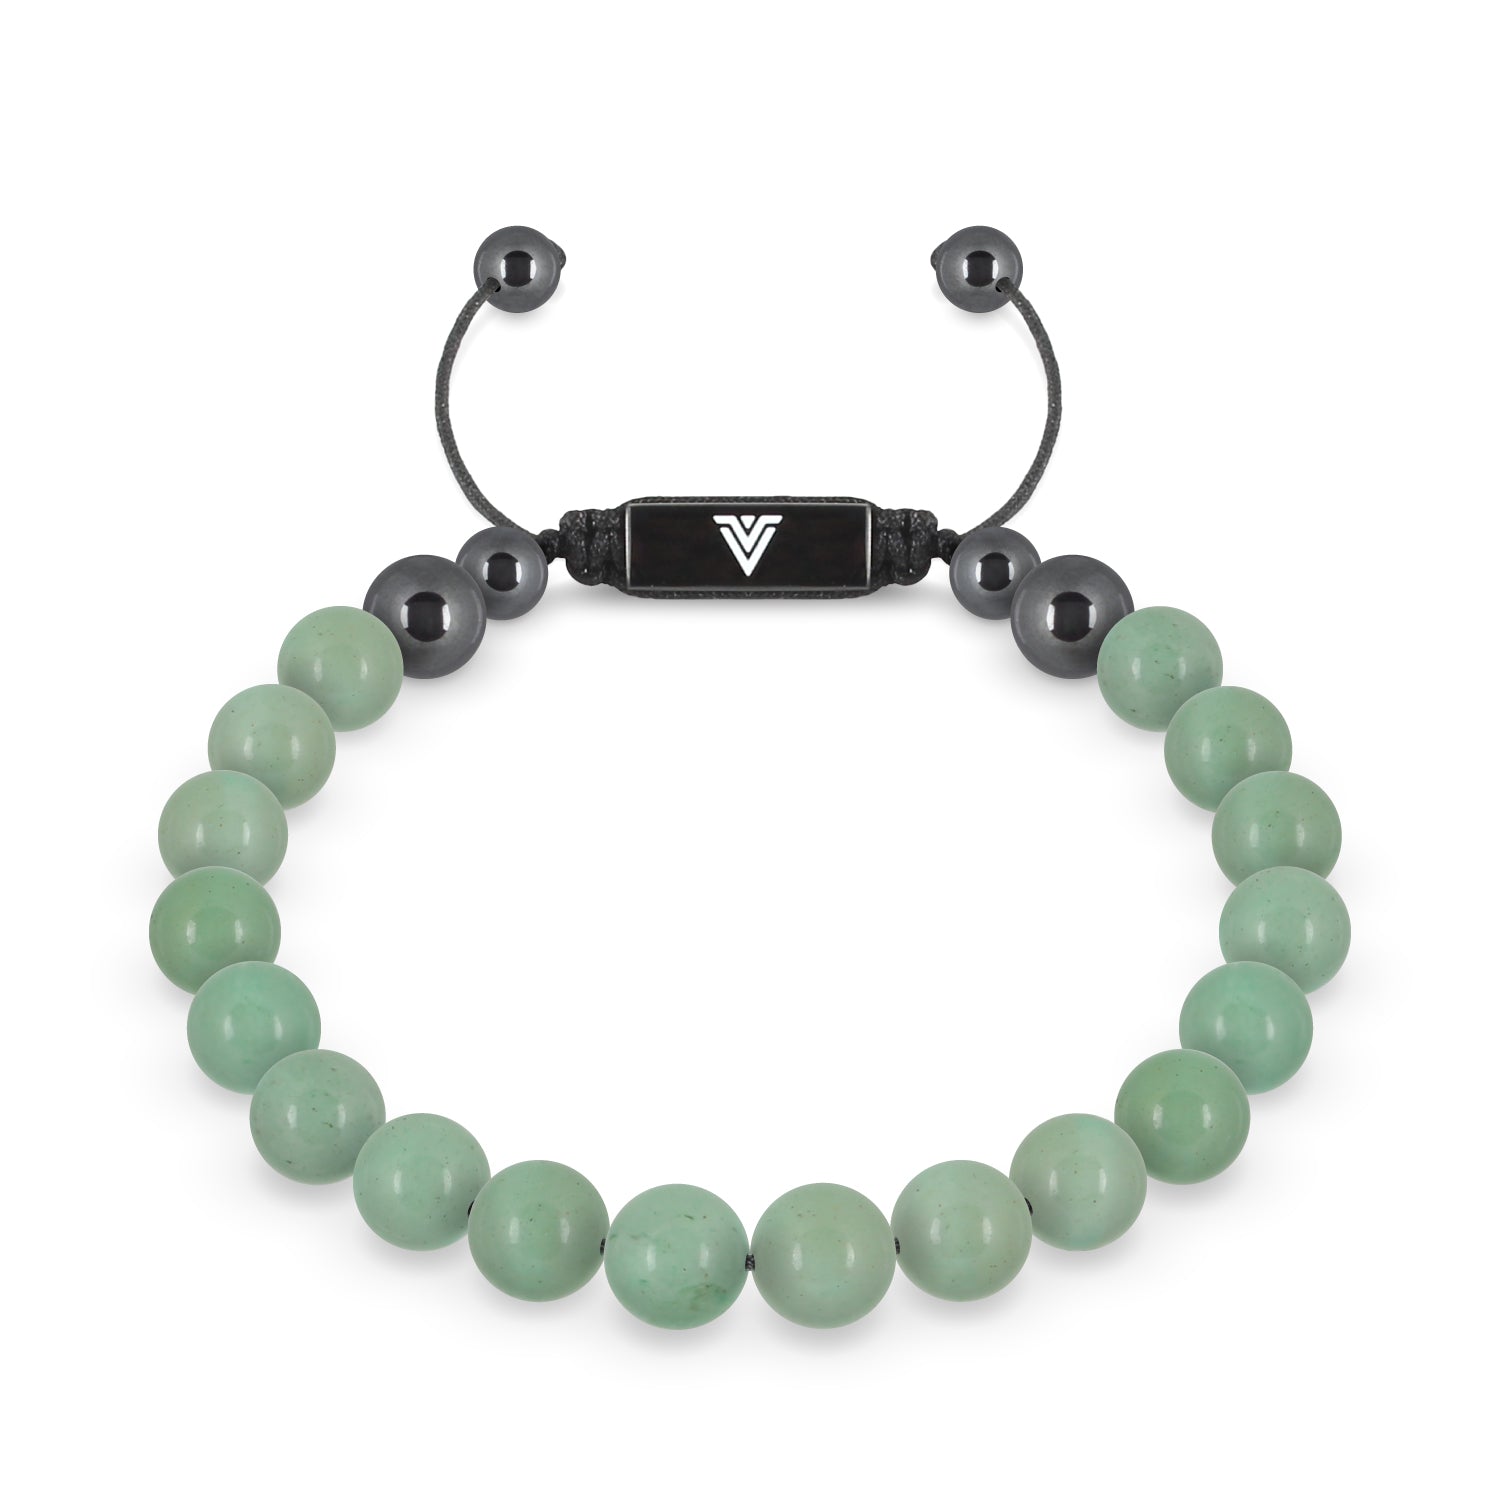 Front view of an 8mm Green Aventurine crystal beaded shamballa bracelet with black stainless steel logo bead made by Voltlin